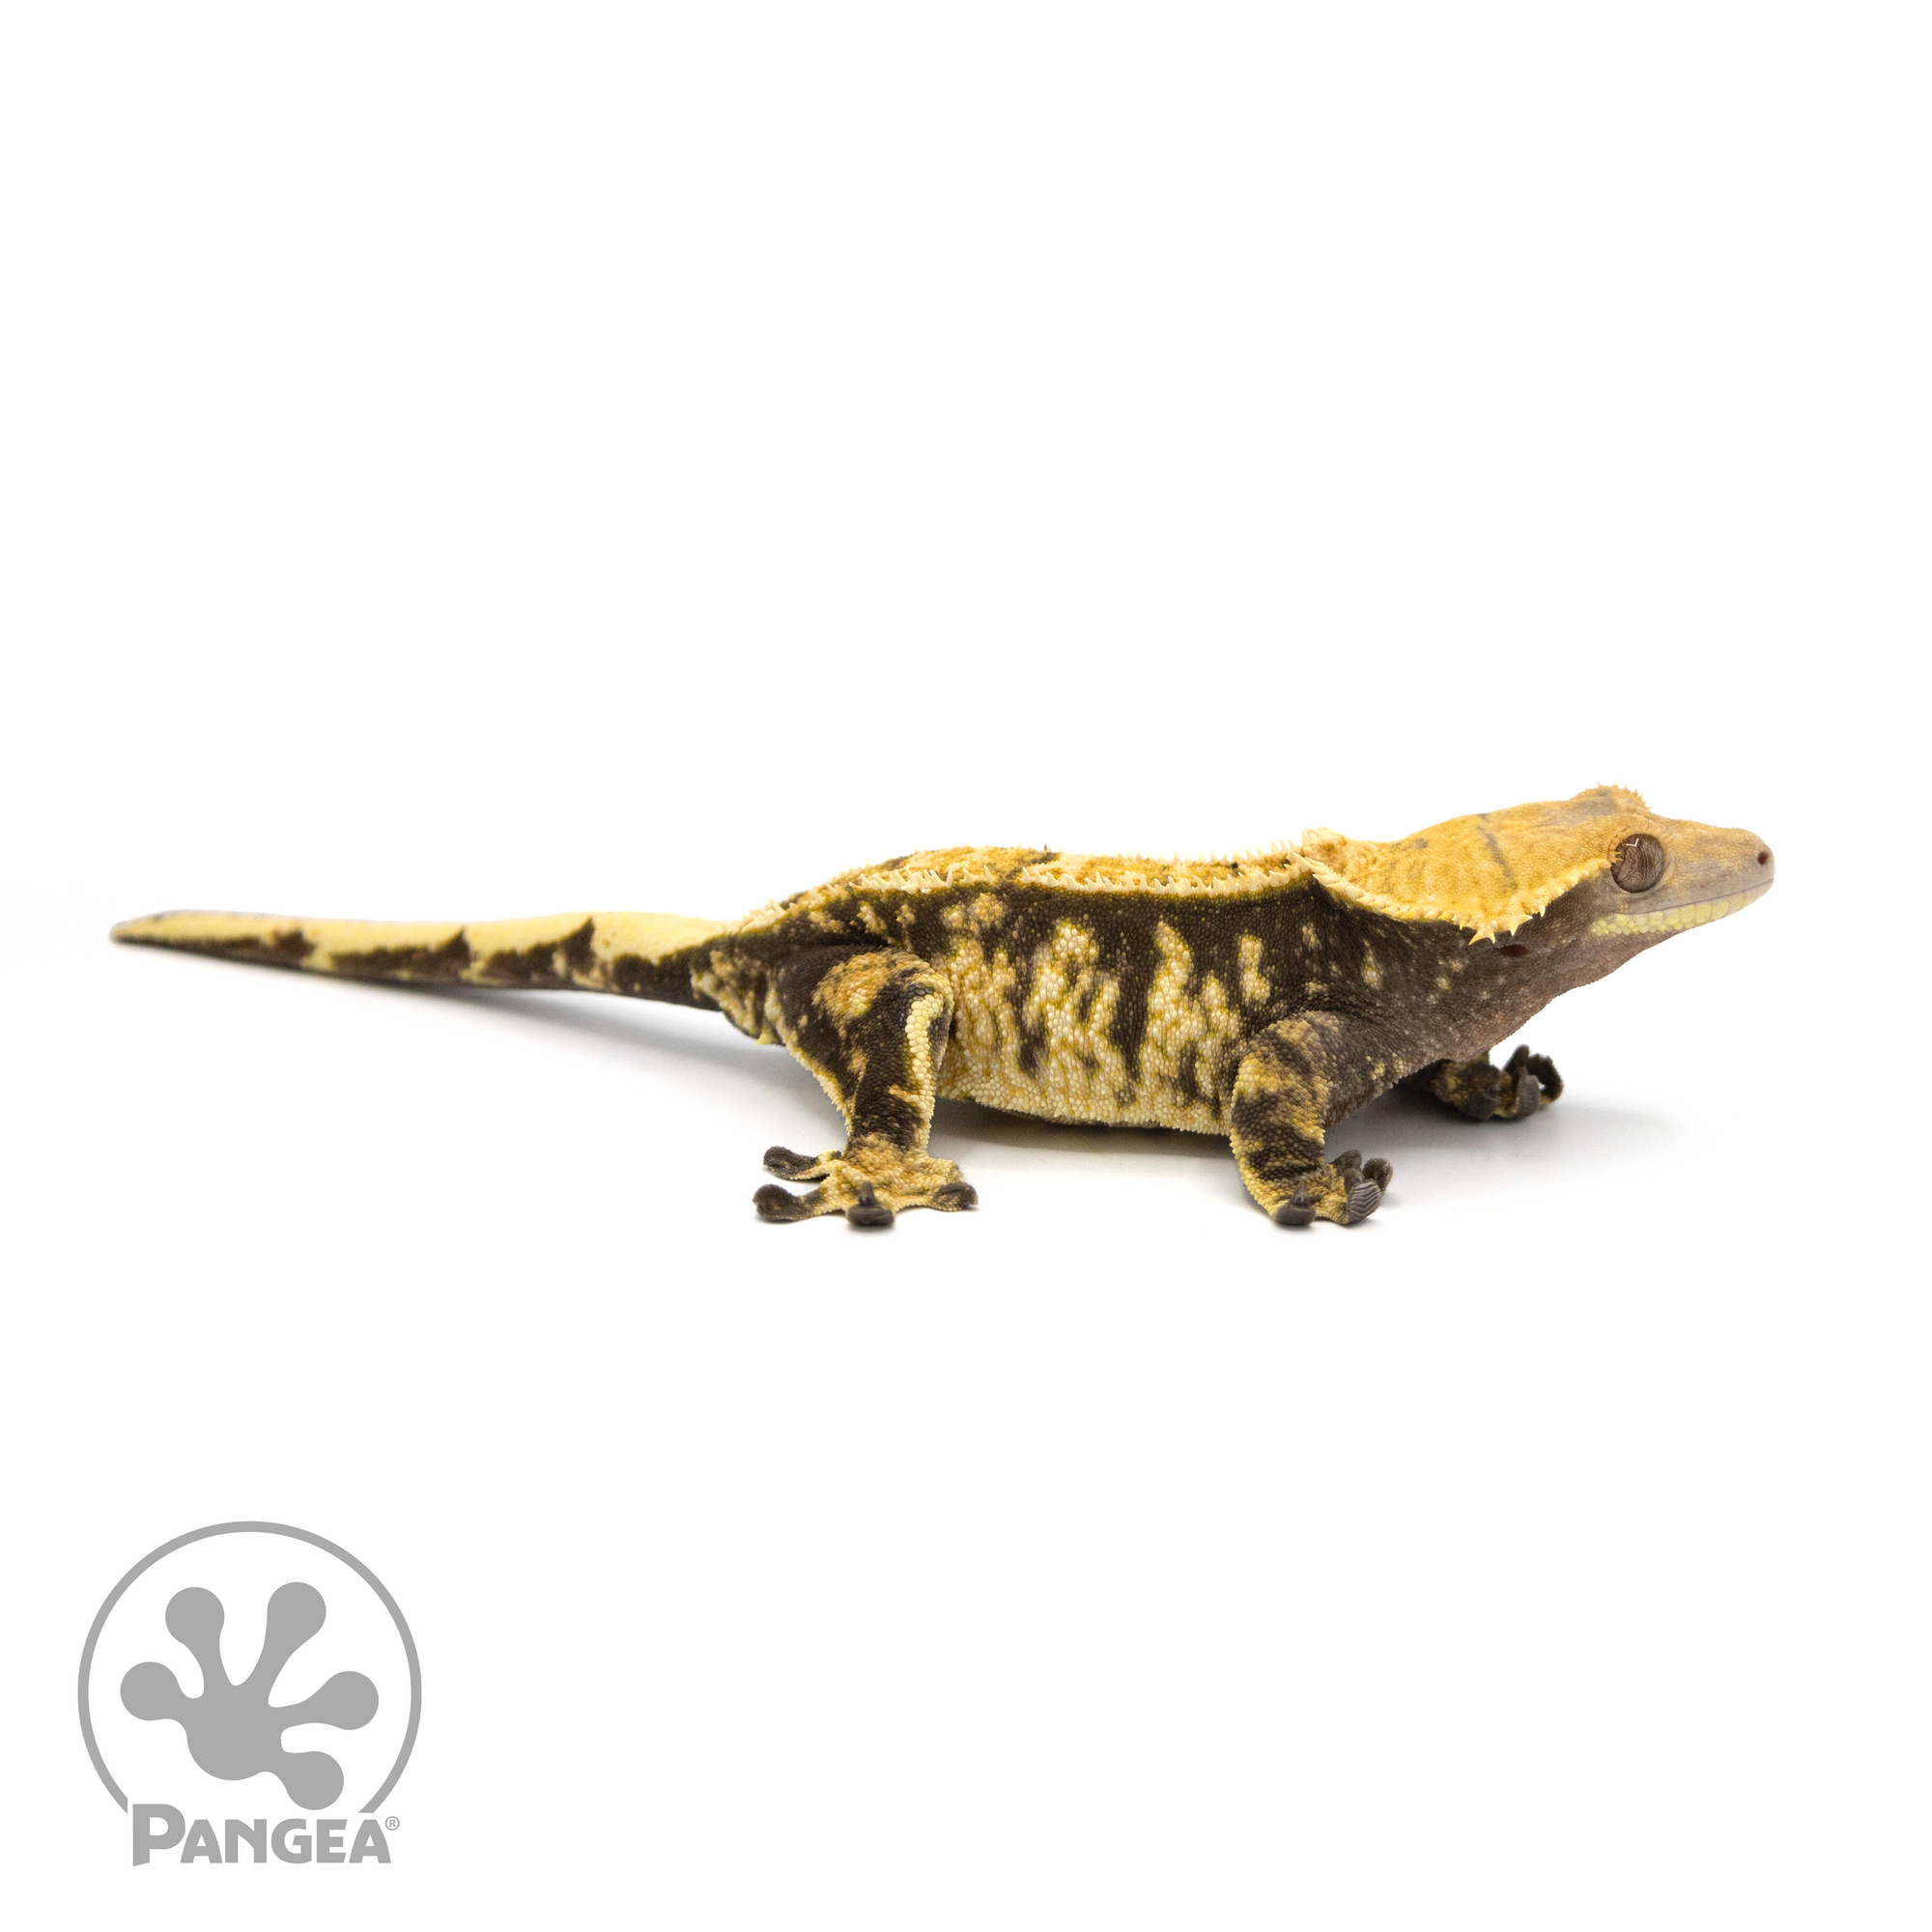 Female Extreme Harlequin Crested Gecko Cr-1419 looking right 